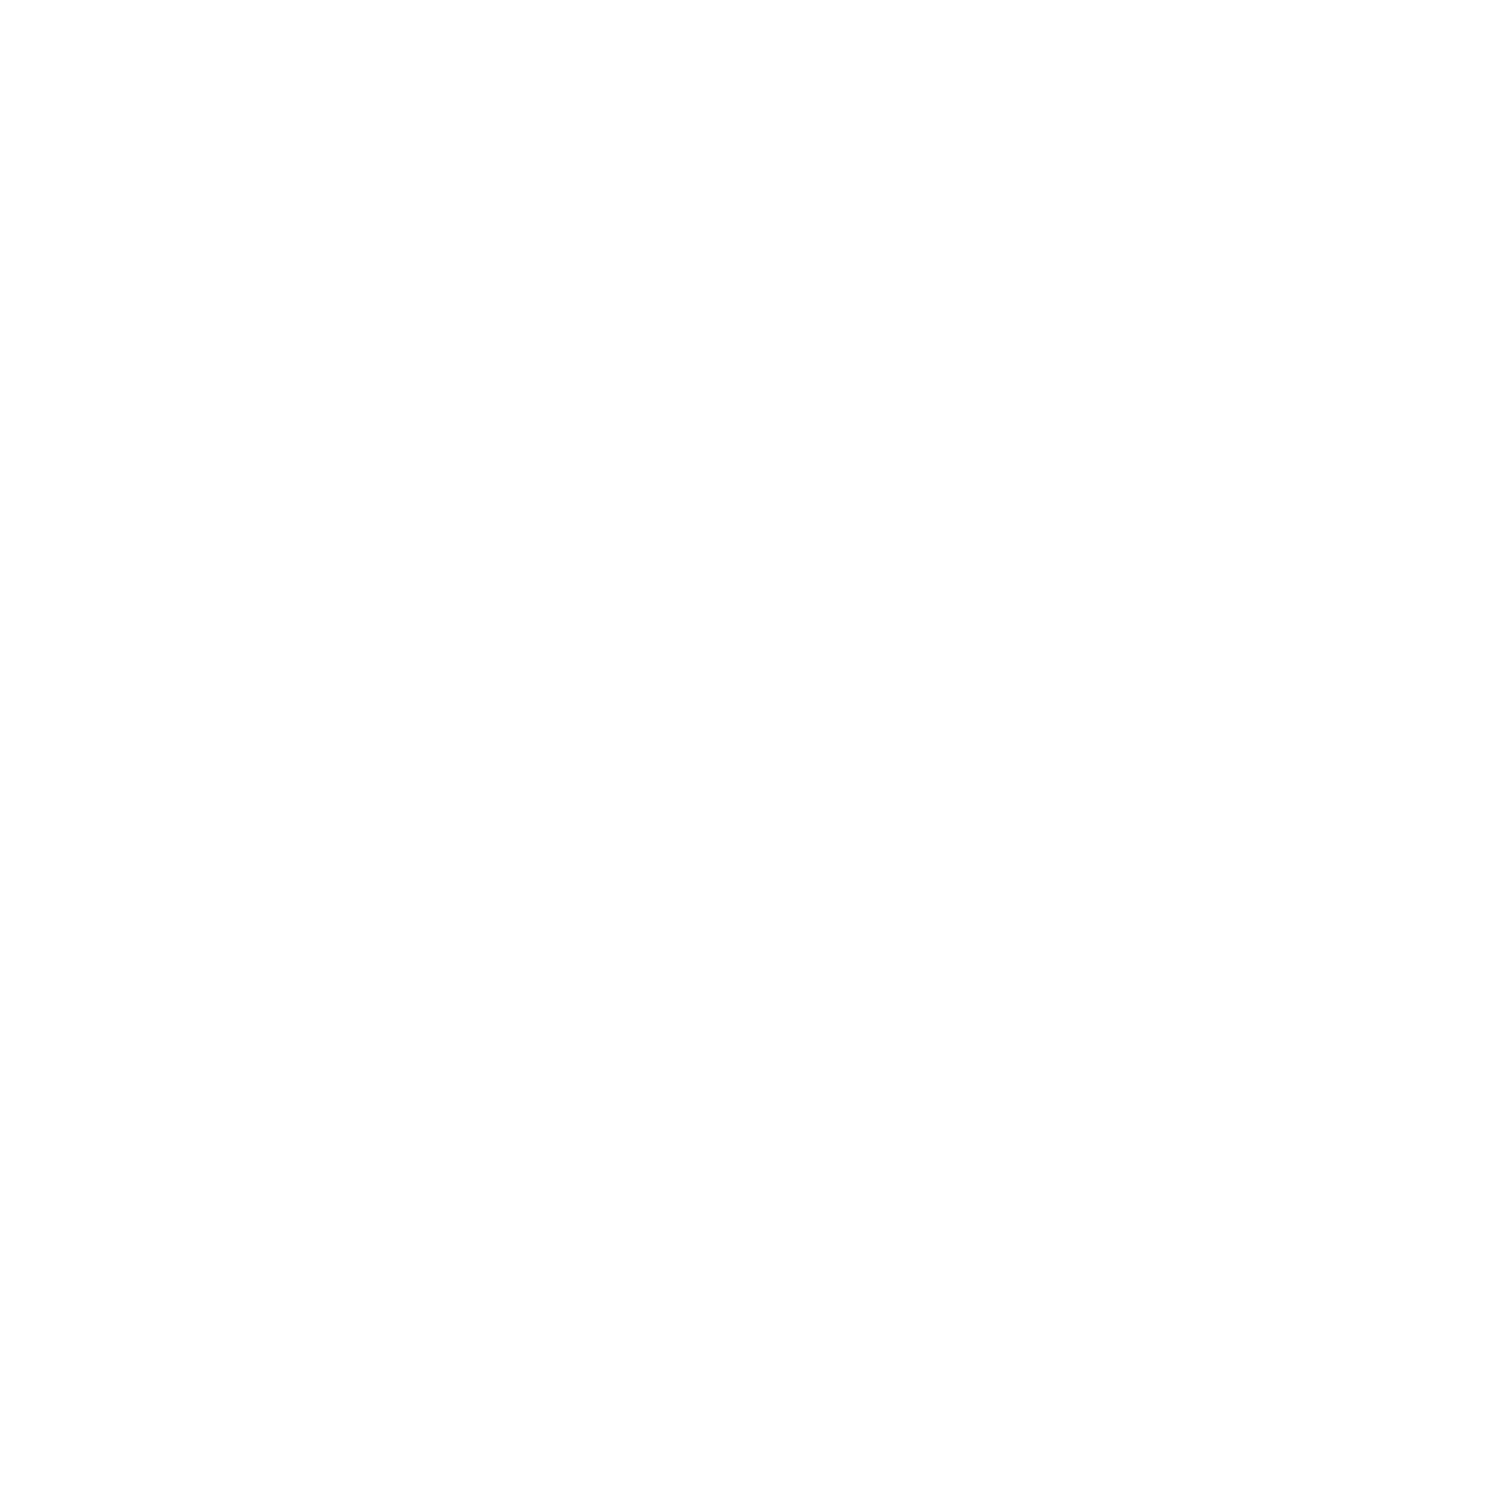 Humanly Resourced